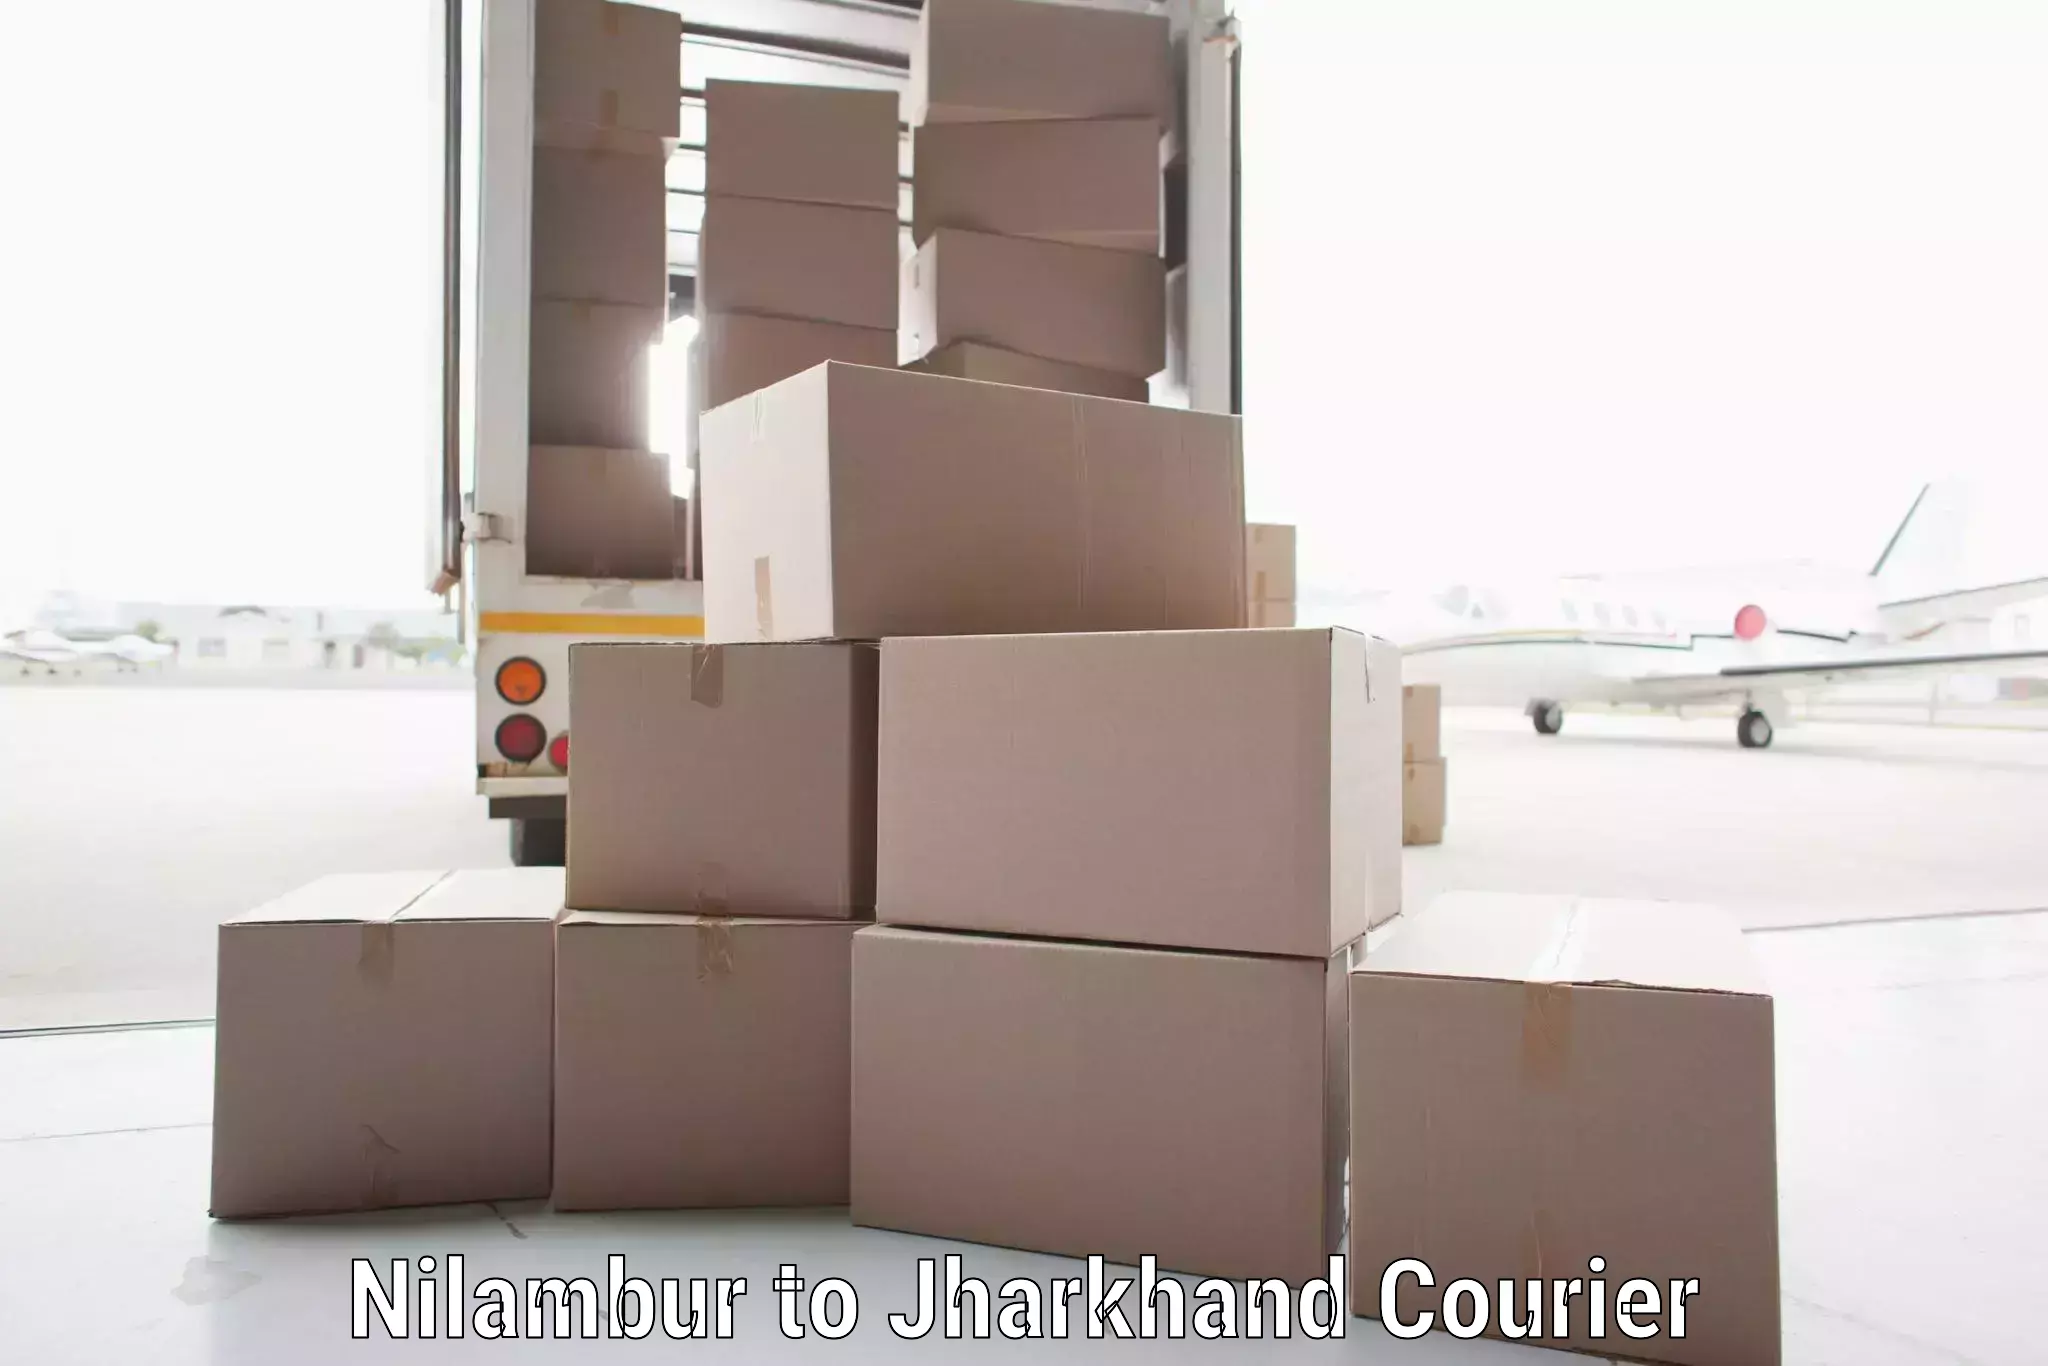 Global courier networks Nilambur to Jharkhand